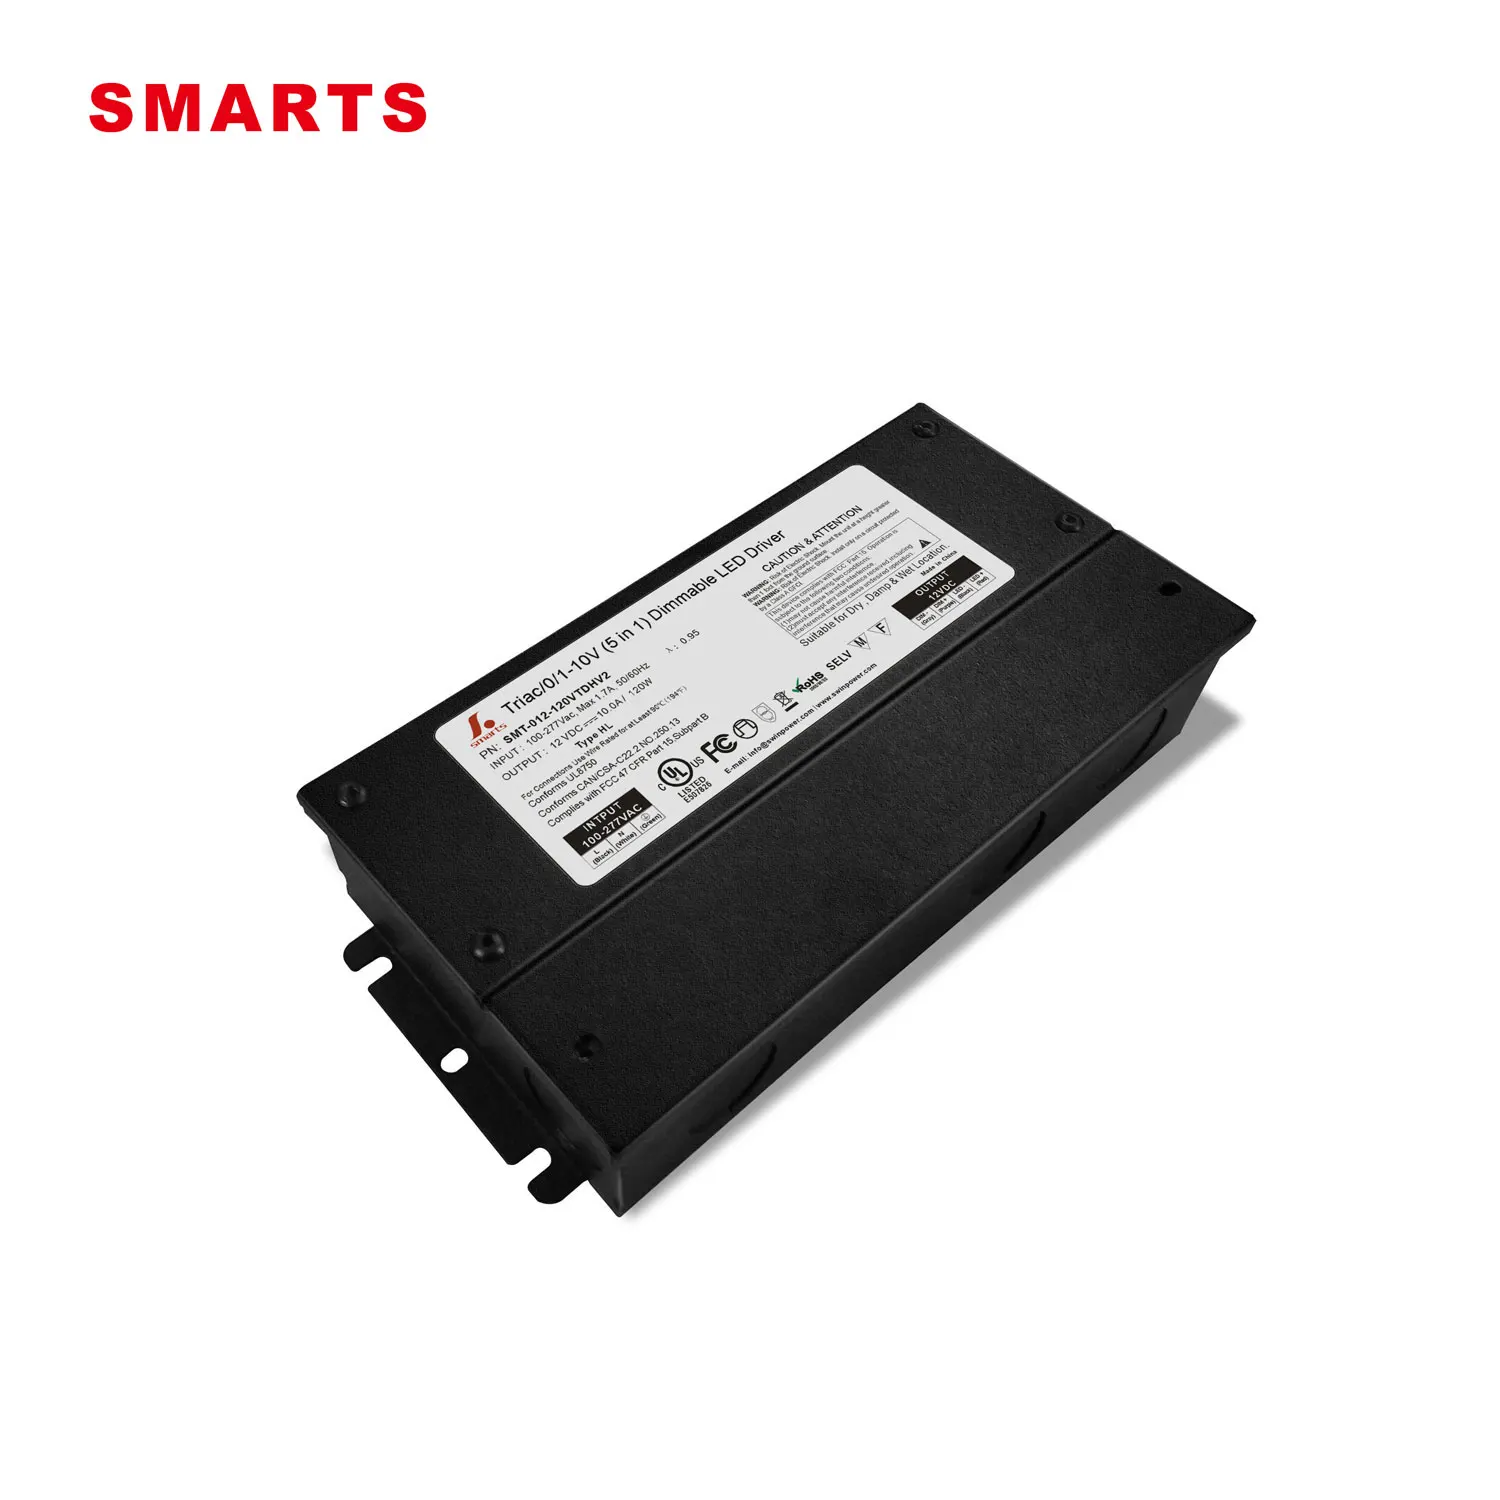 12v 120w constant voltage power supply for Led strip 5 ב 1 dimmable led driver